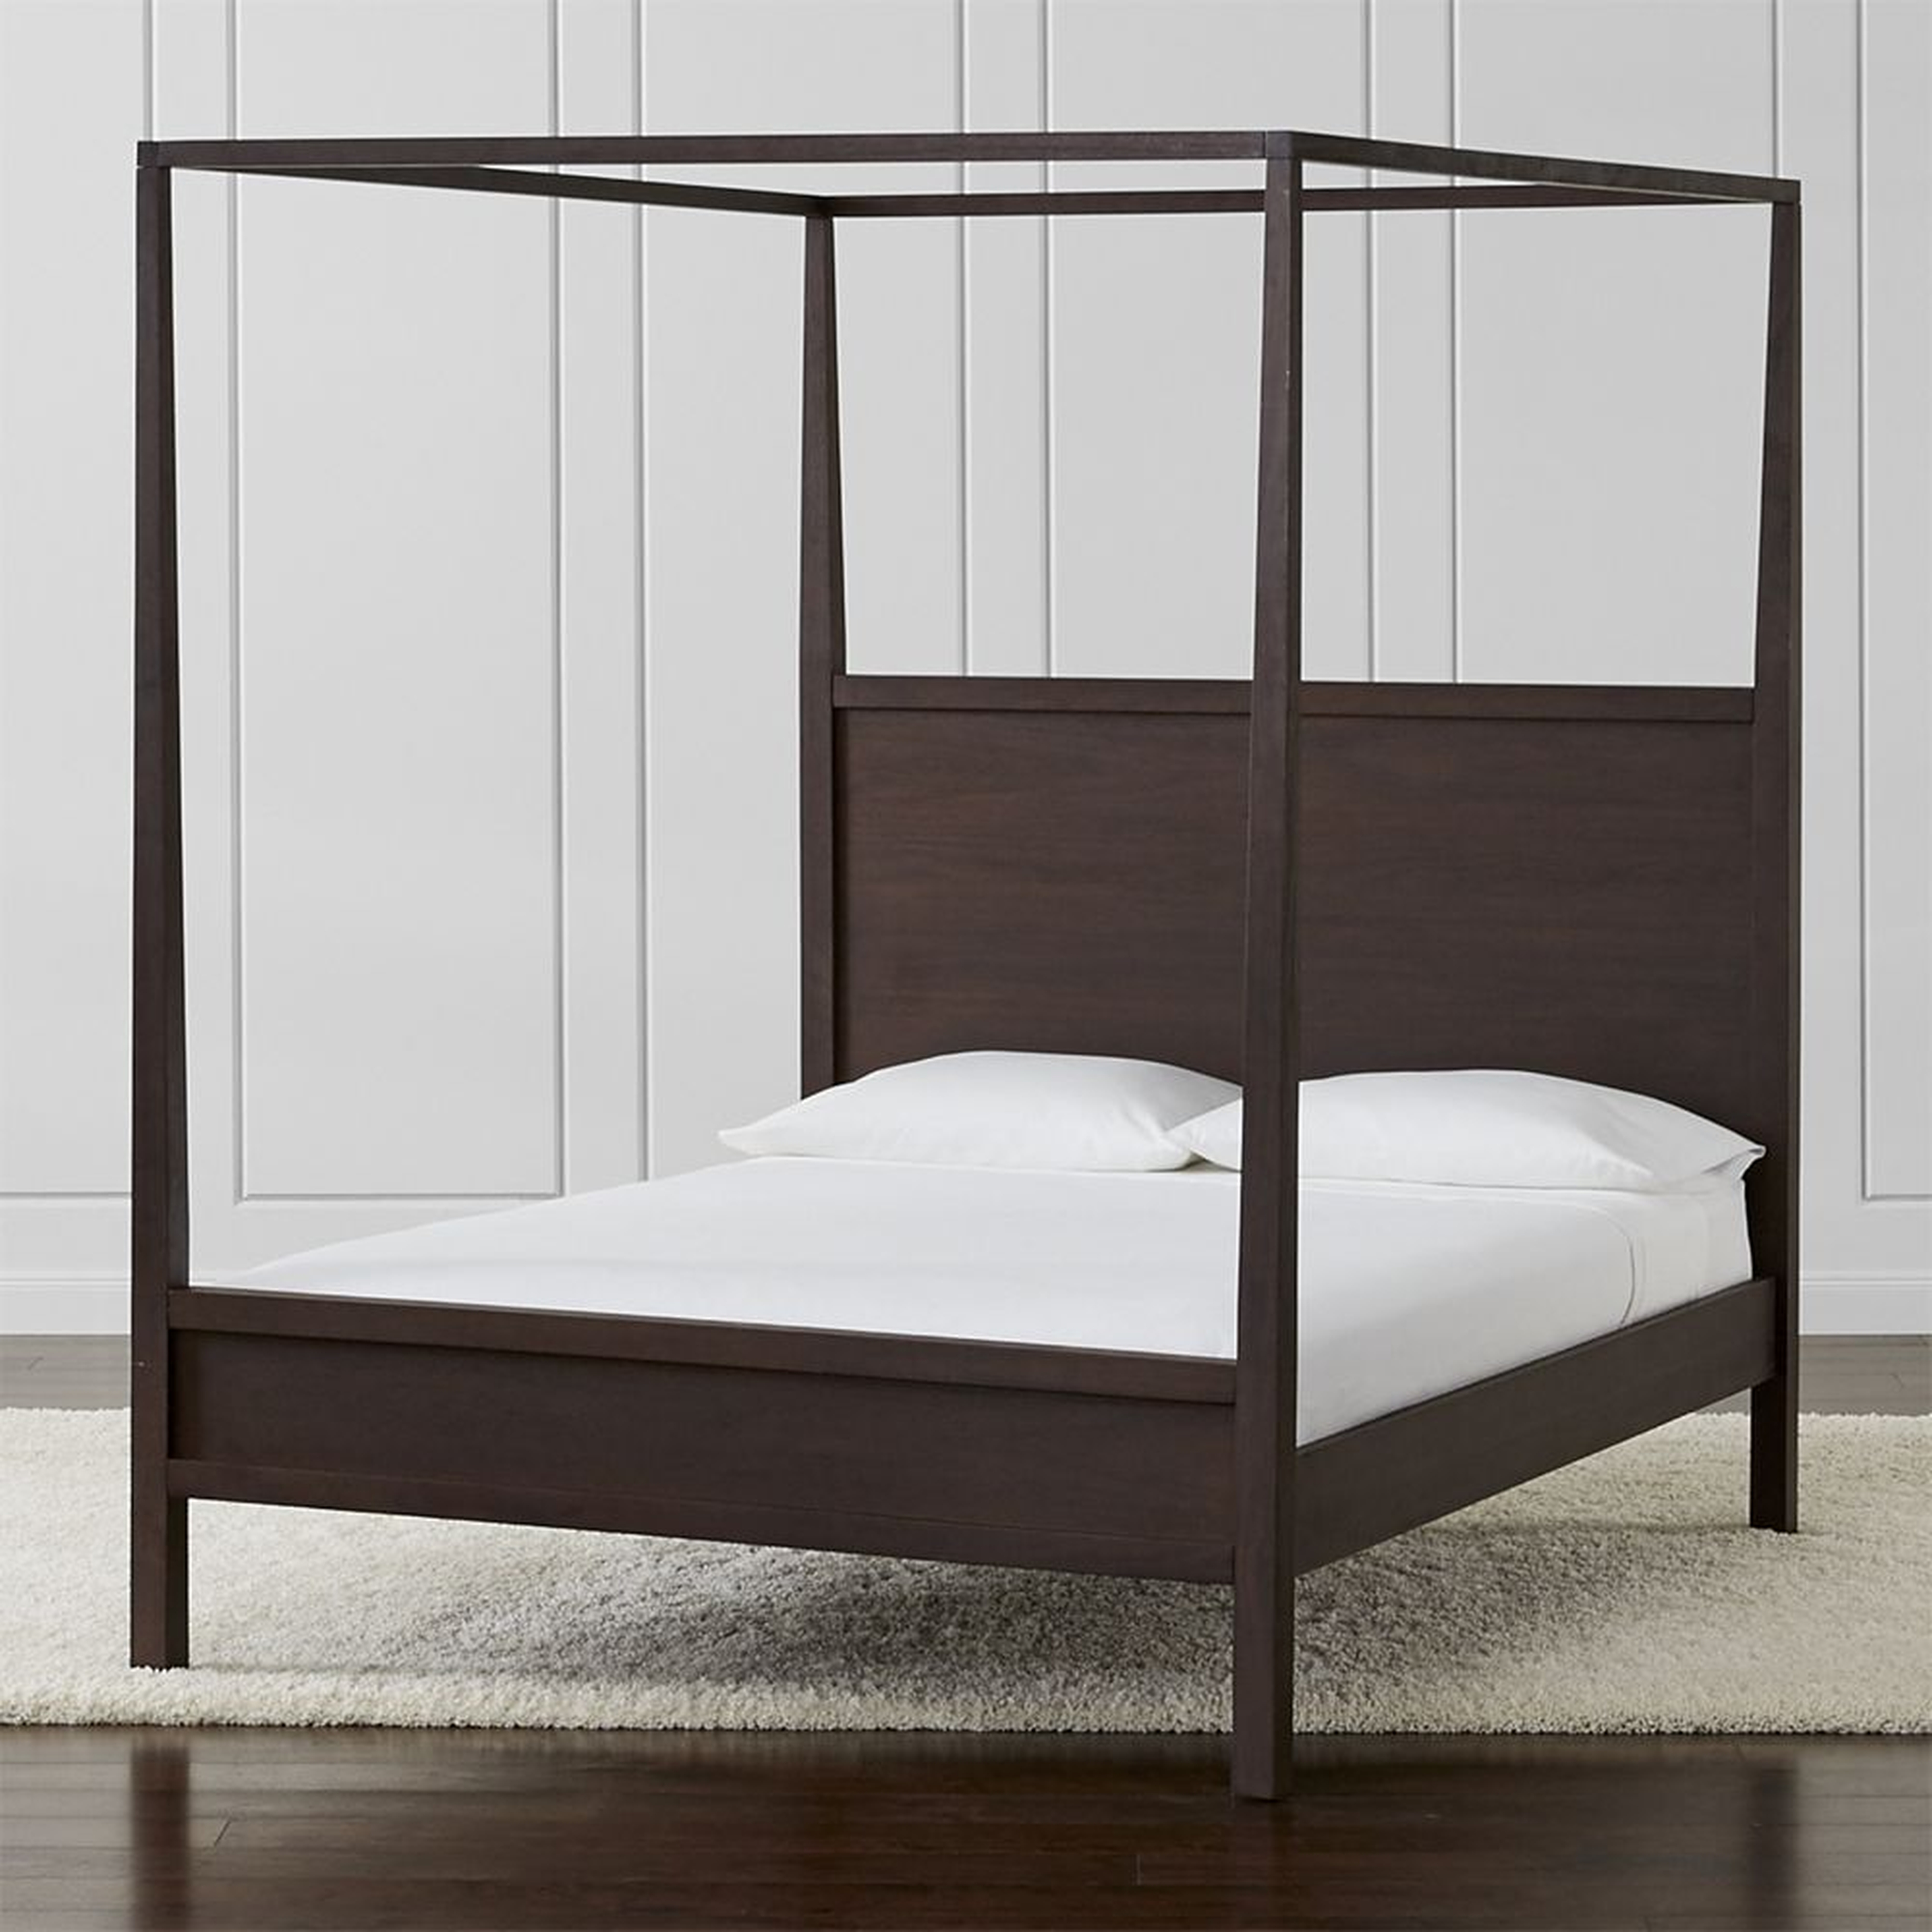 Keane Espresso Wood Queen Canopy Bed - Crate and Barrel